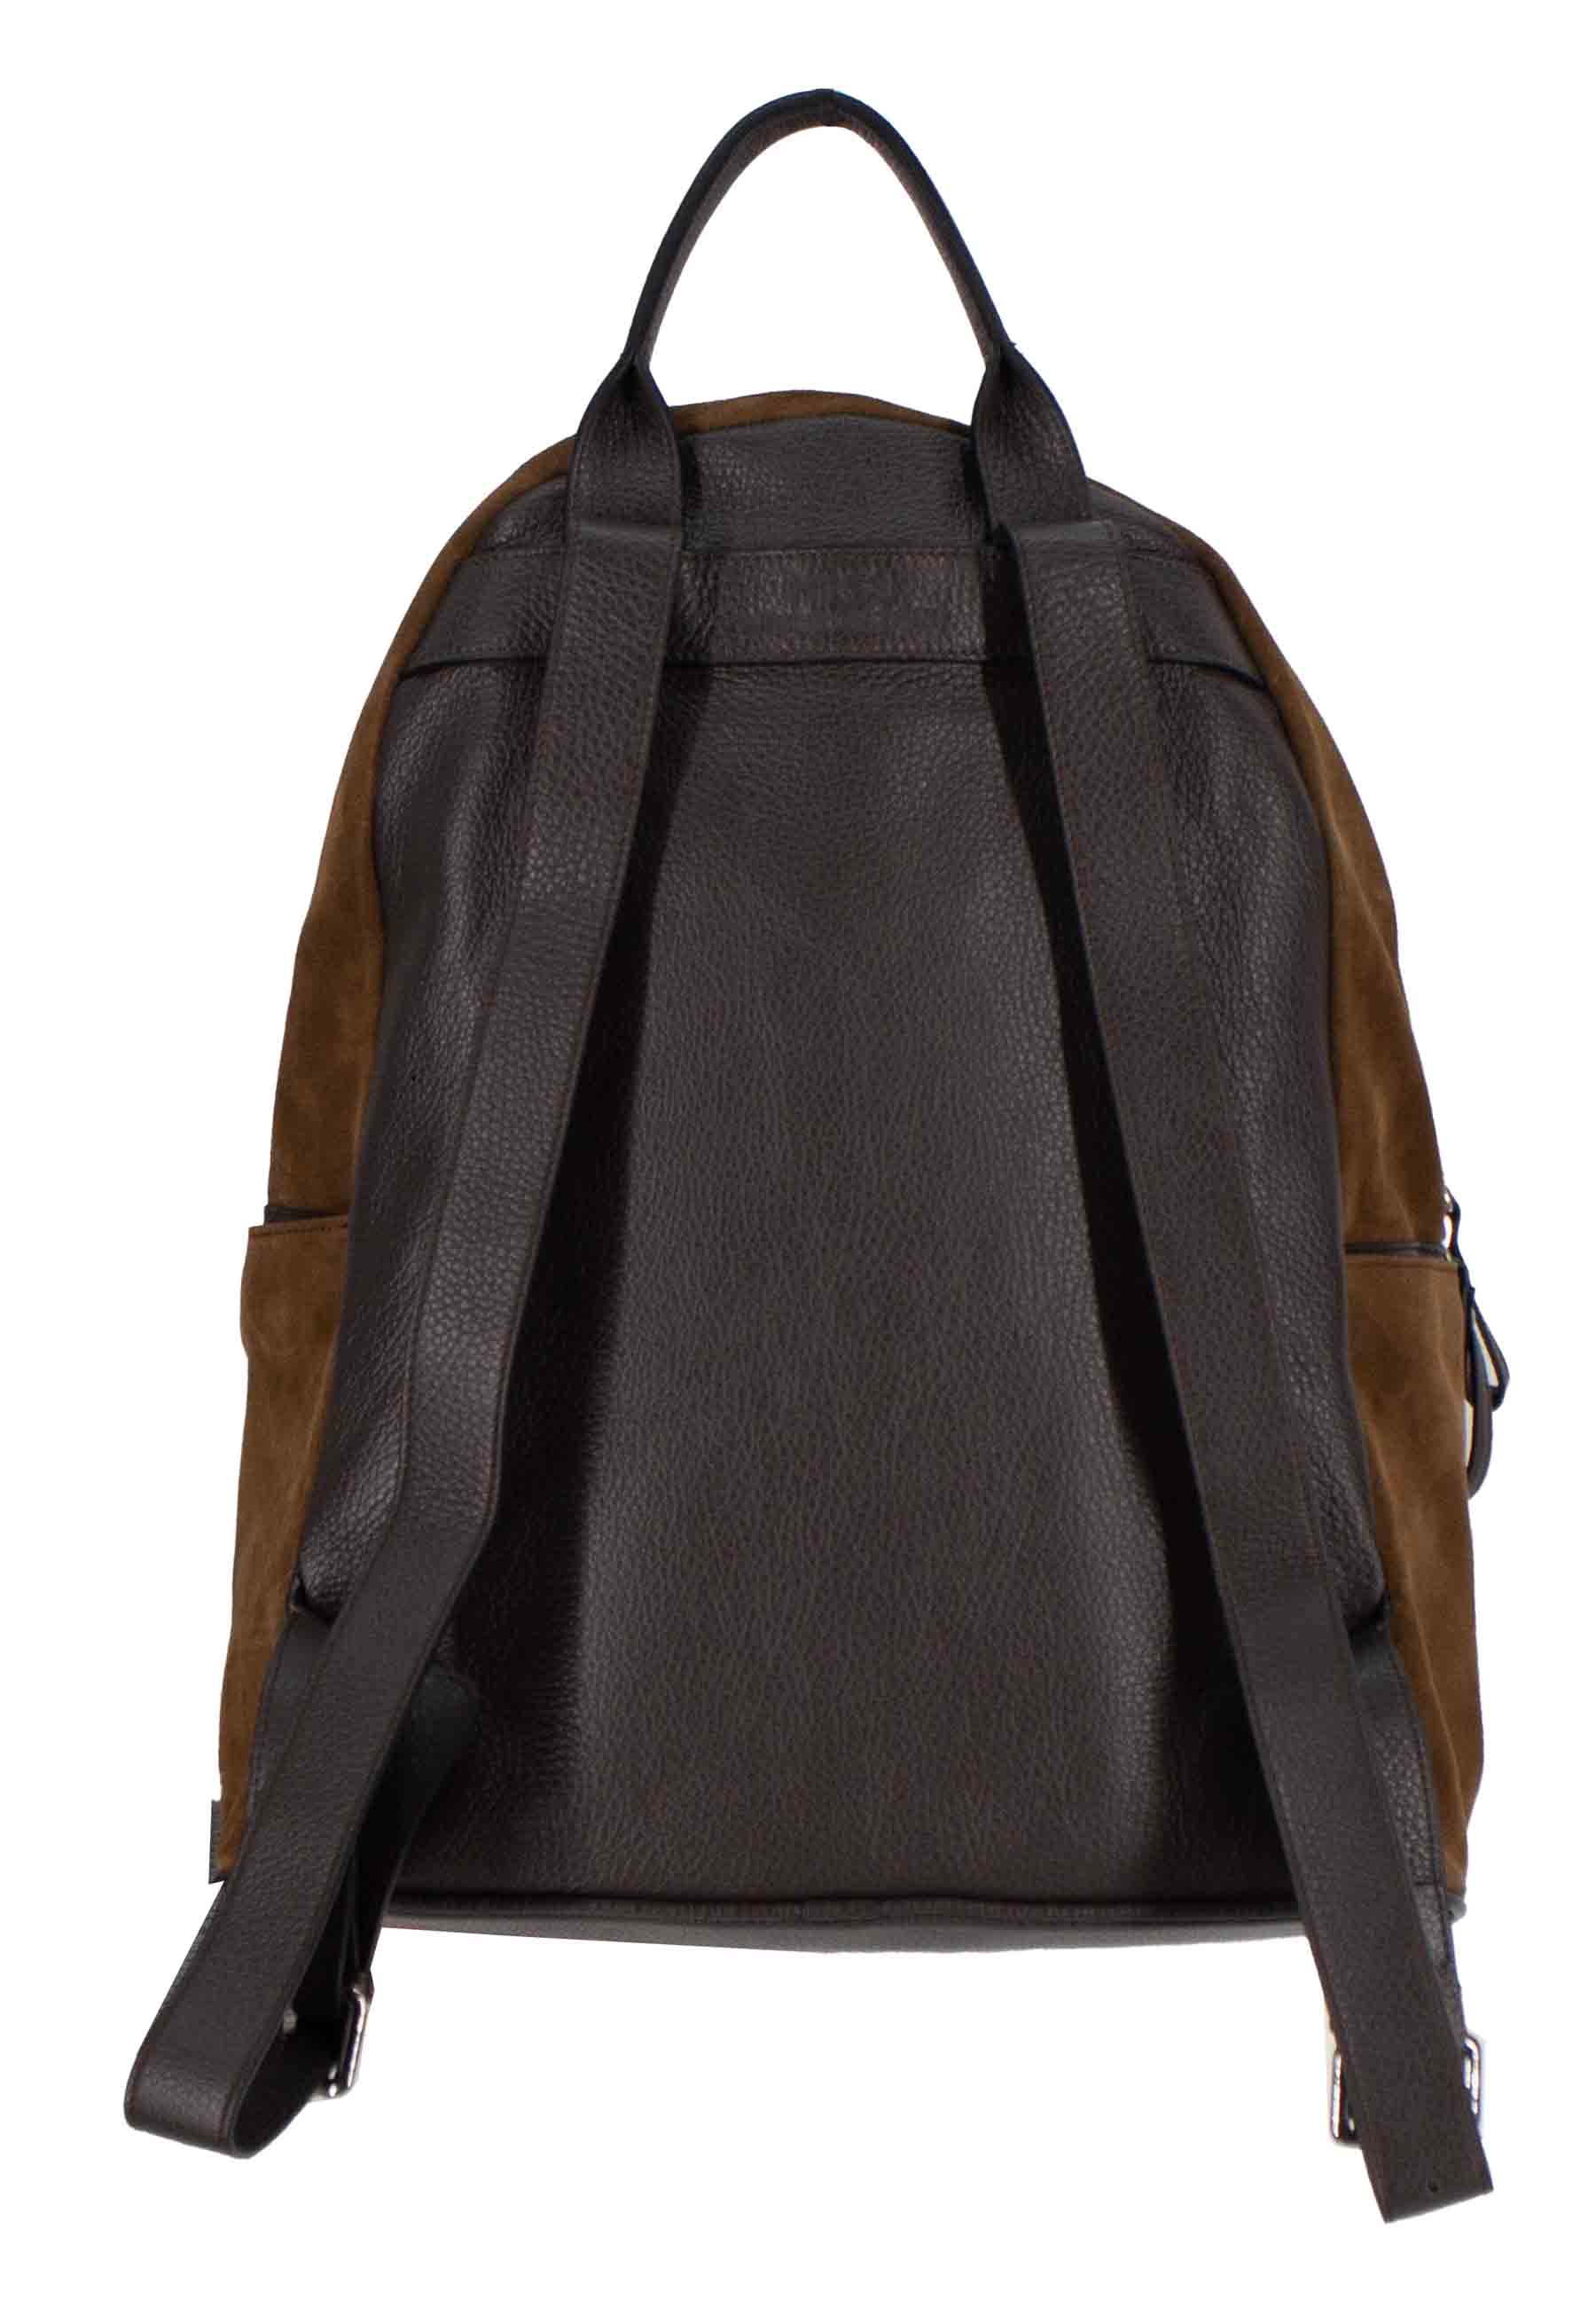 Men's backpack in brown suede with zip opening and leather shoulder straps